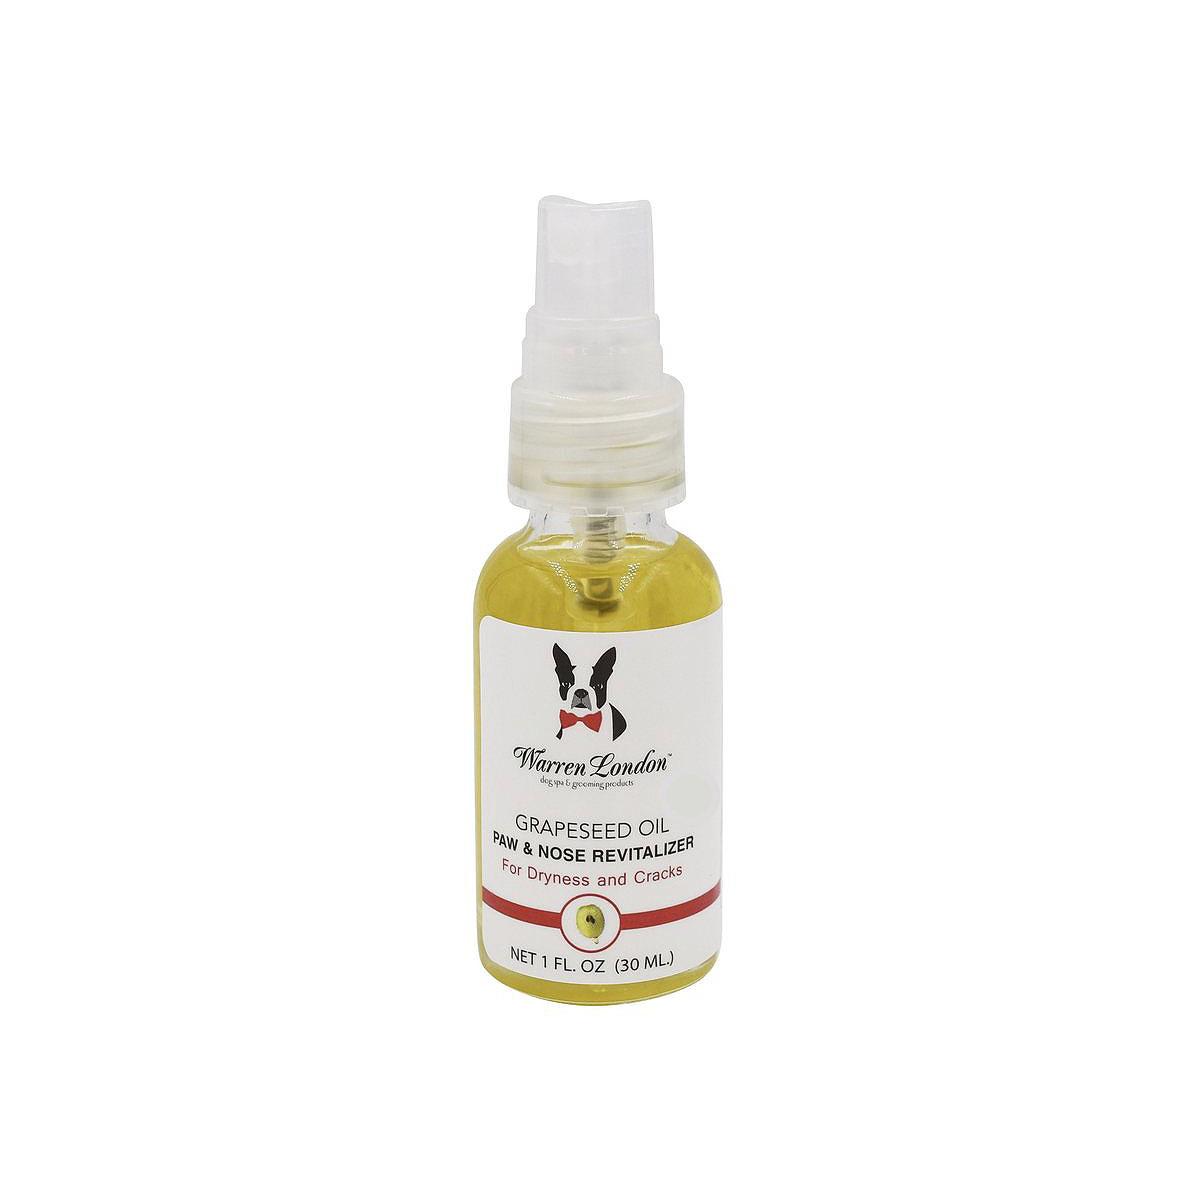 Warren London Grapeseed Oil Dog Paw & Nose Revitalizer